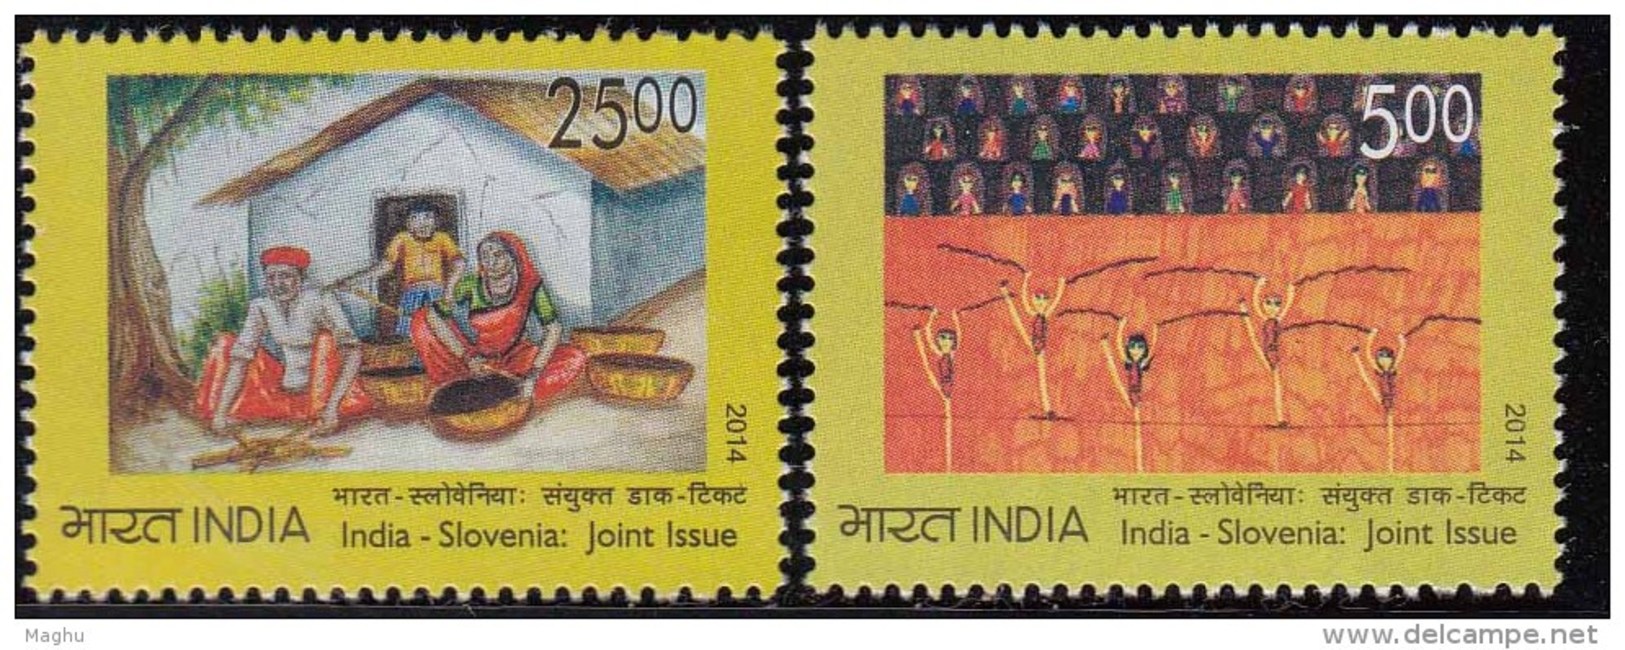 India MNH 2014 ,Set Of 2,, India Slovenia Joint Issue, Child Rights,  Dance Culture, Art, Bamboo Crafts, - Nuovi